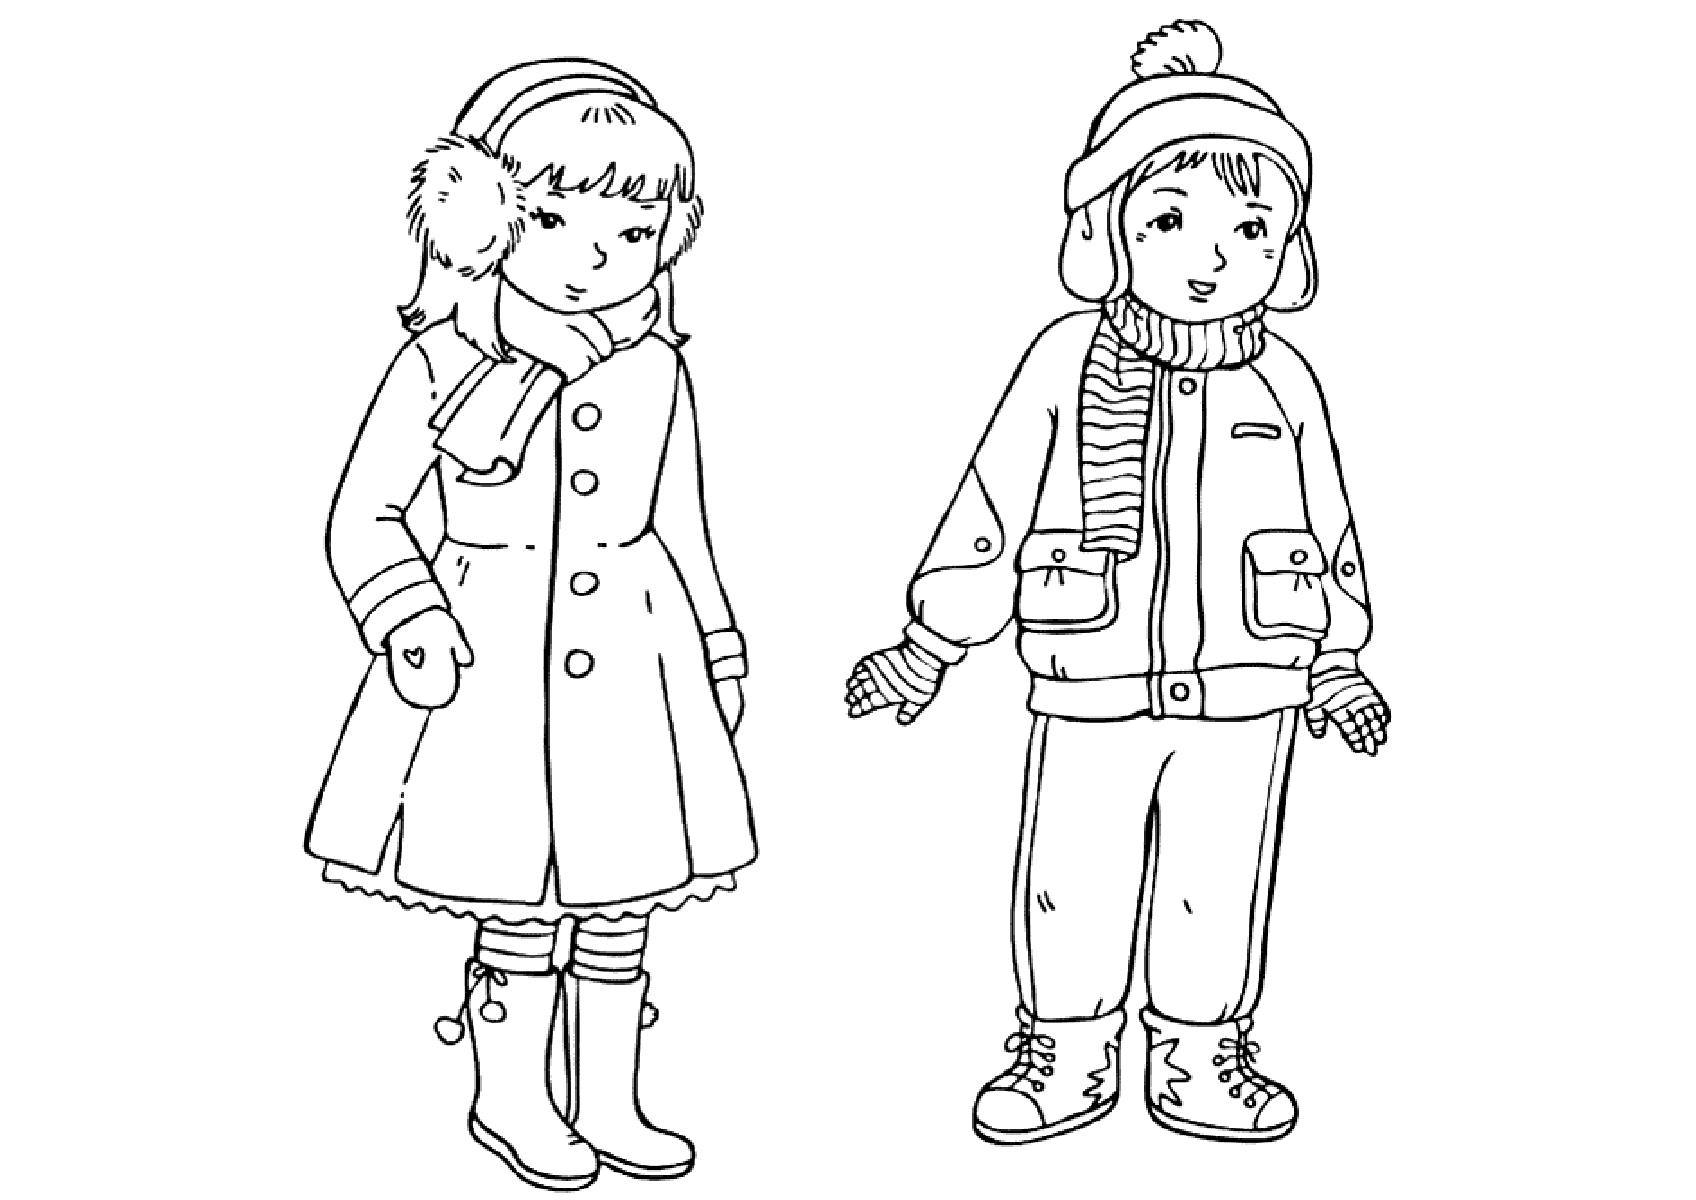 coloring pages of winter clothes winter clothes coloring pages to download and print for free pages clothes coloring winter of 